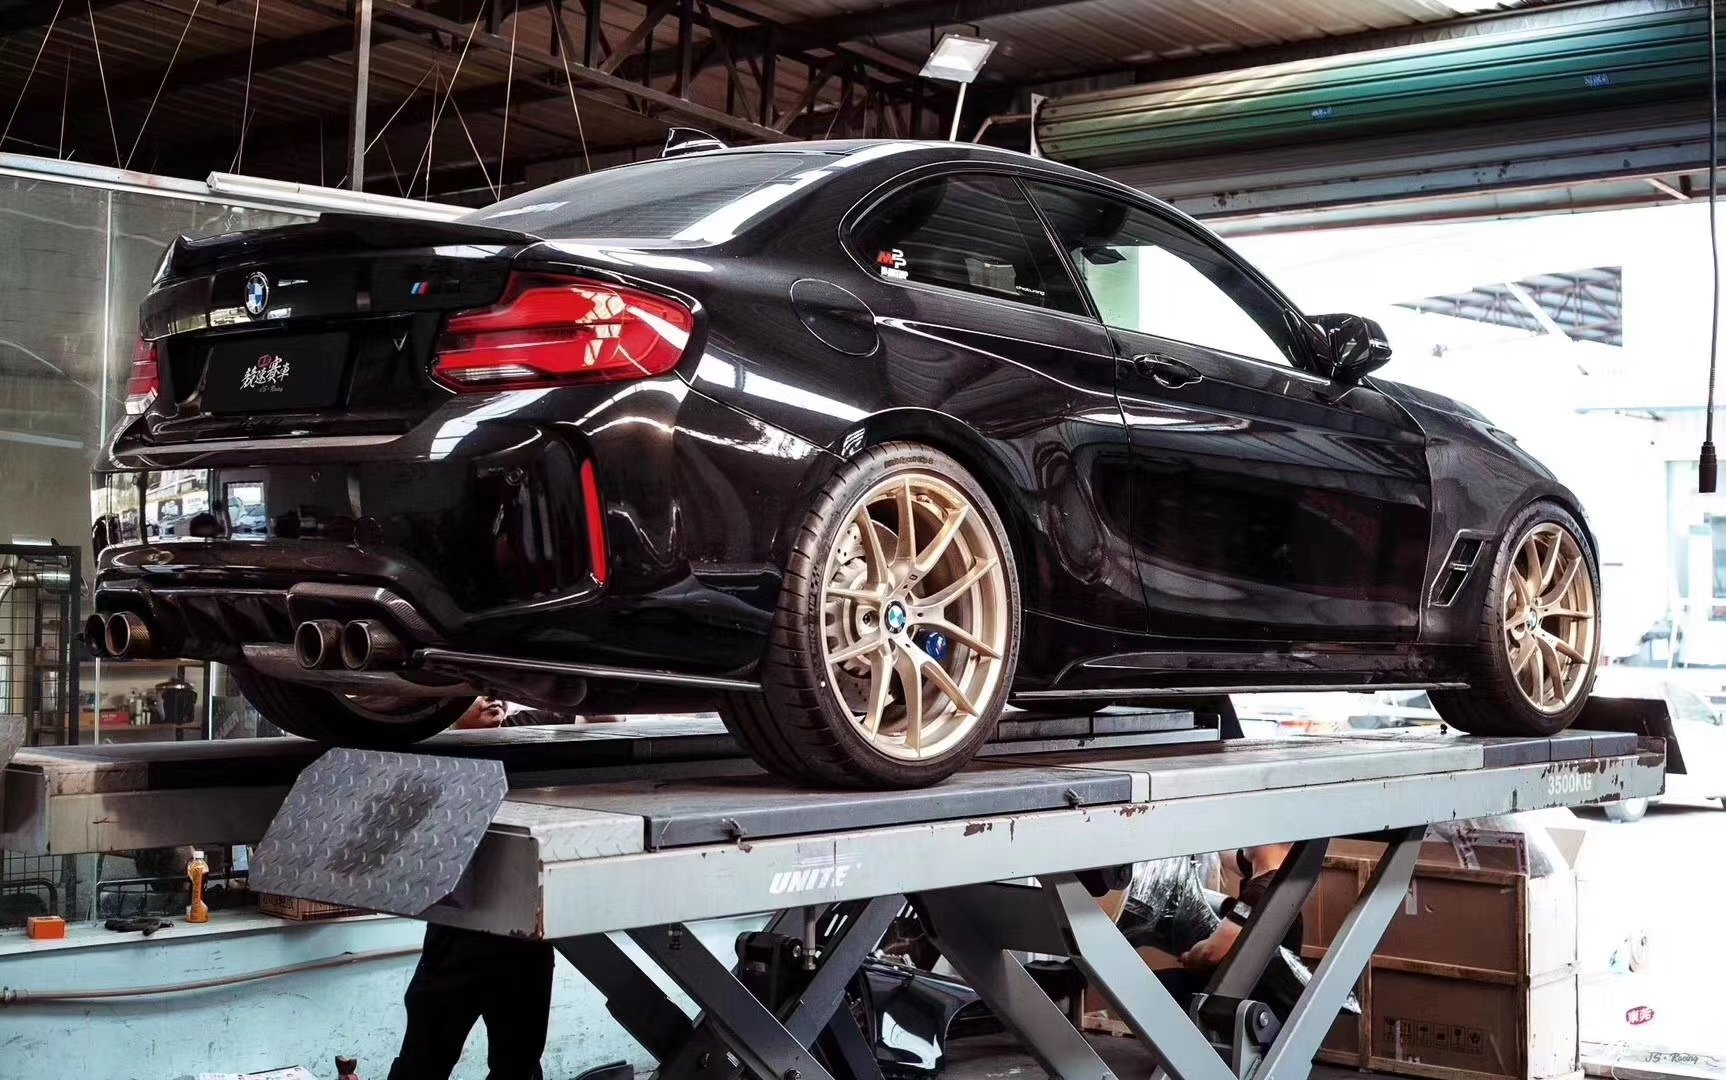 Check our price and buy CMST Carbon Fiber Body Kit set for BMW M2 / M2C!